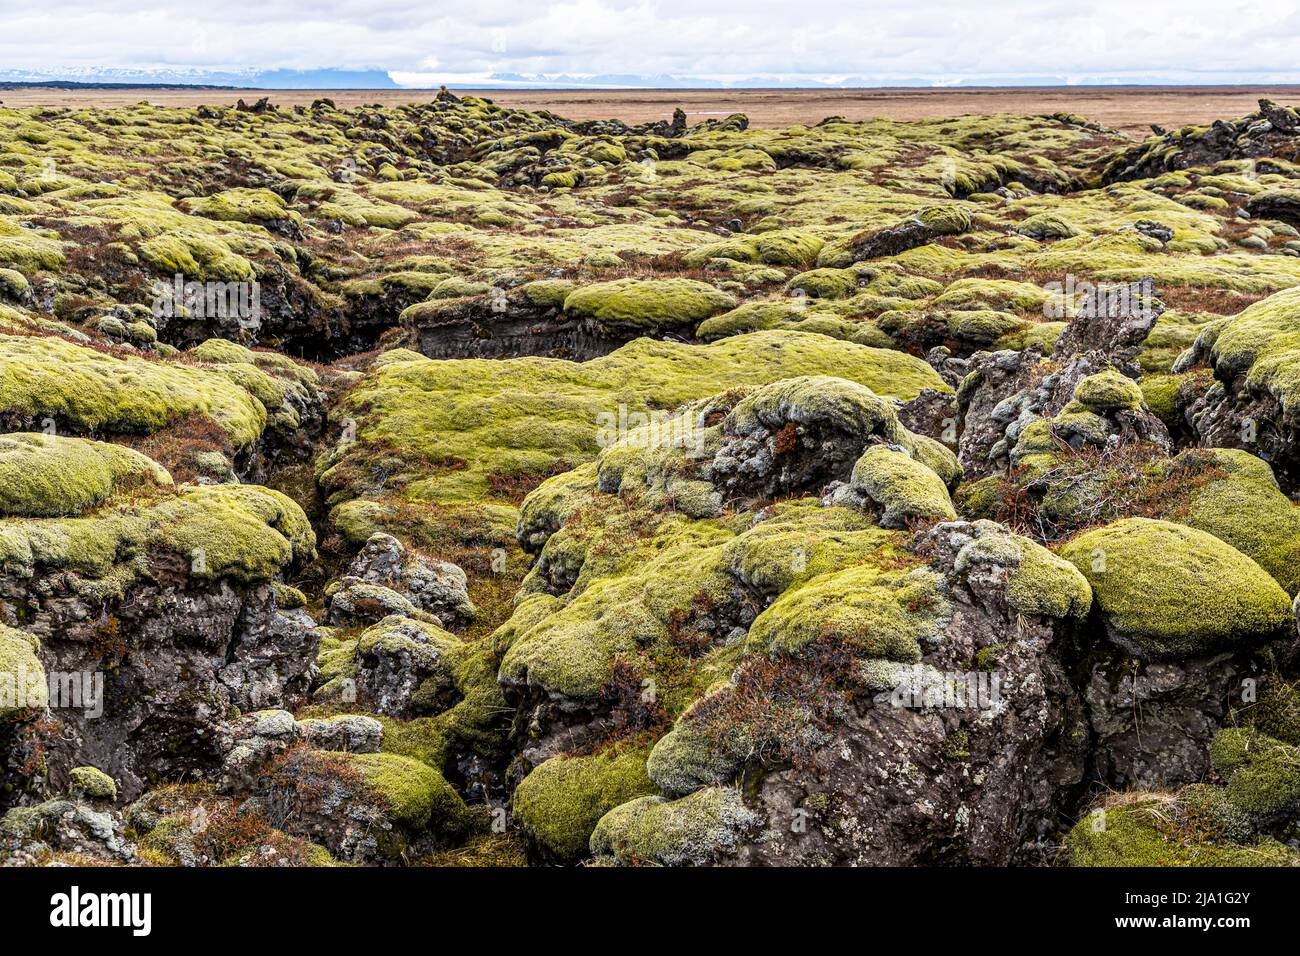 The Eldhraun (fire lava) is a huge lava field in Iceland, which today is mostly covered with moss. It is the largest lava field in the world and covers an area of 565 km². It was formed during the devastating Laki eruption in 1783/1784. Stock Photo